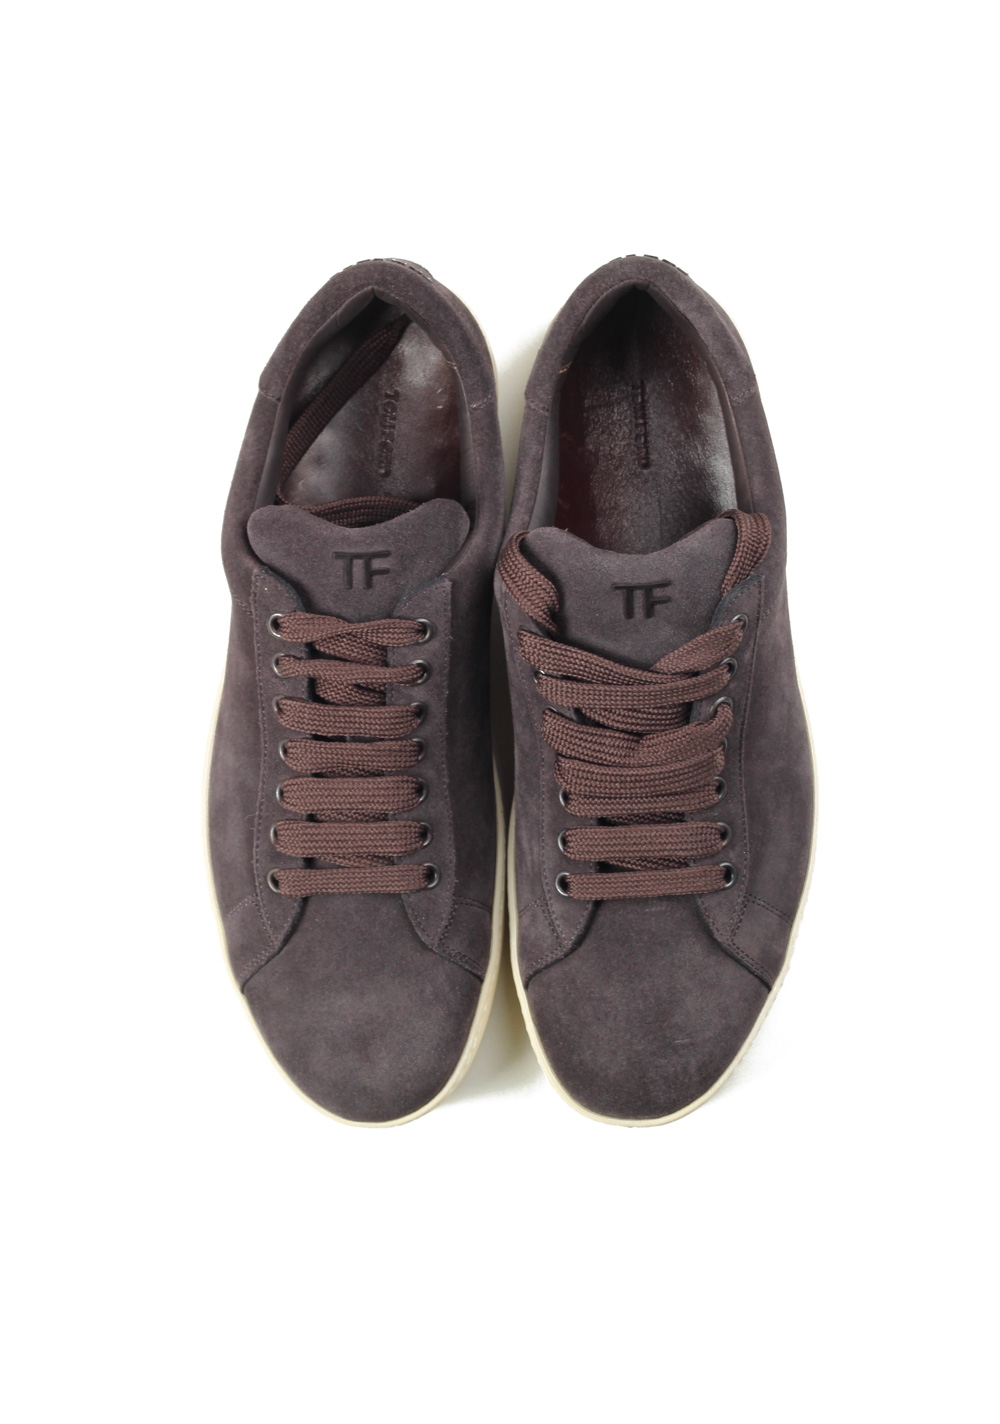 TOM FORD Russel low Top Sneaker Shoes Size 10.5 Uk / 11.5 U.S. | Costume Limité